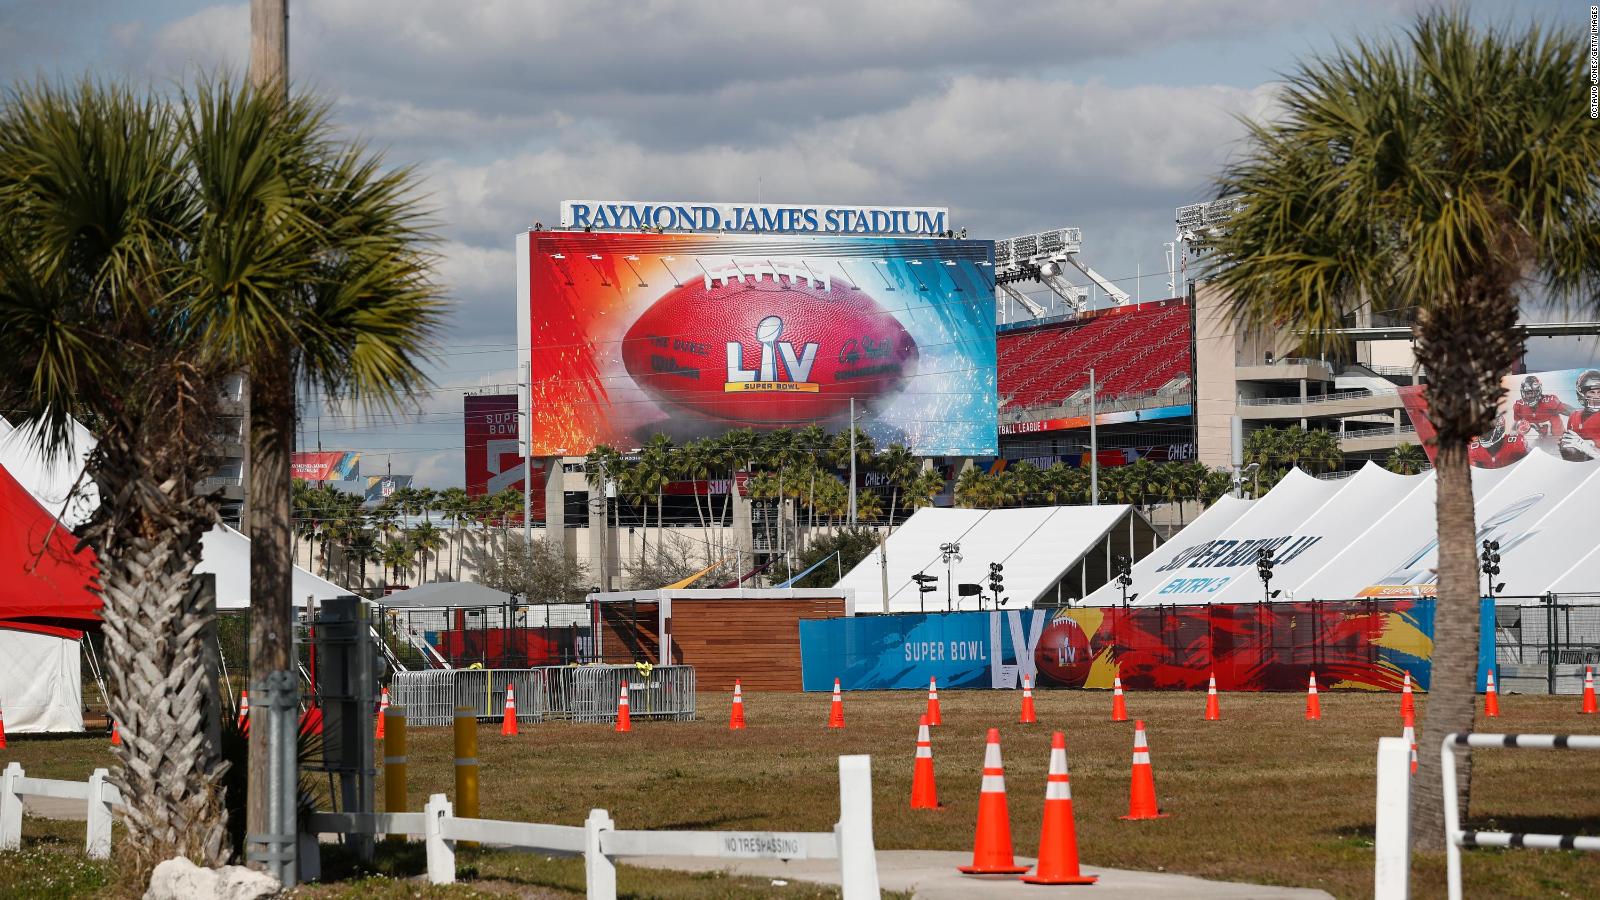 How to watch the Super Bowl live Start time, channels and other things